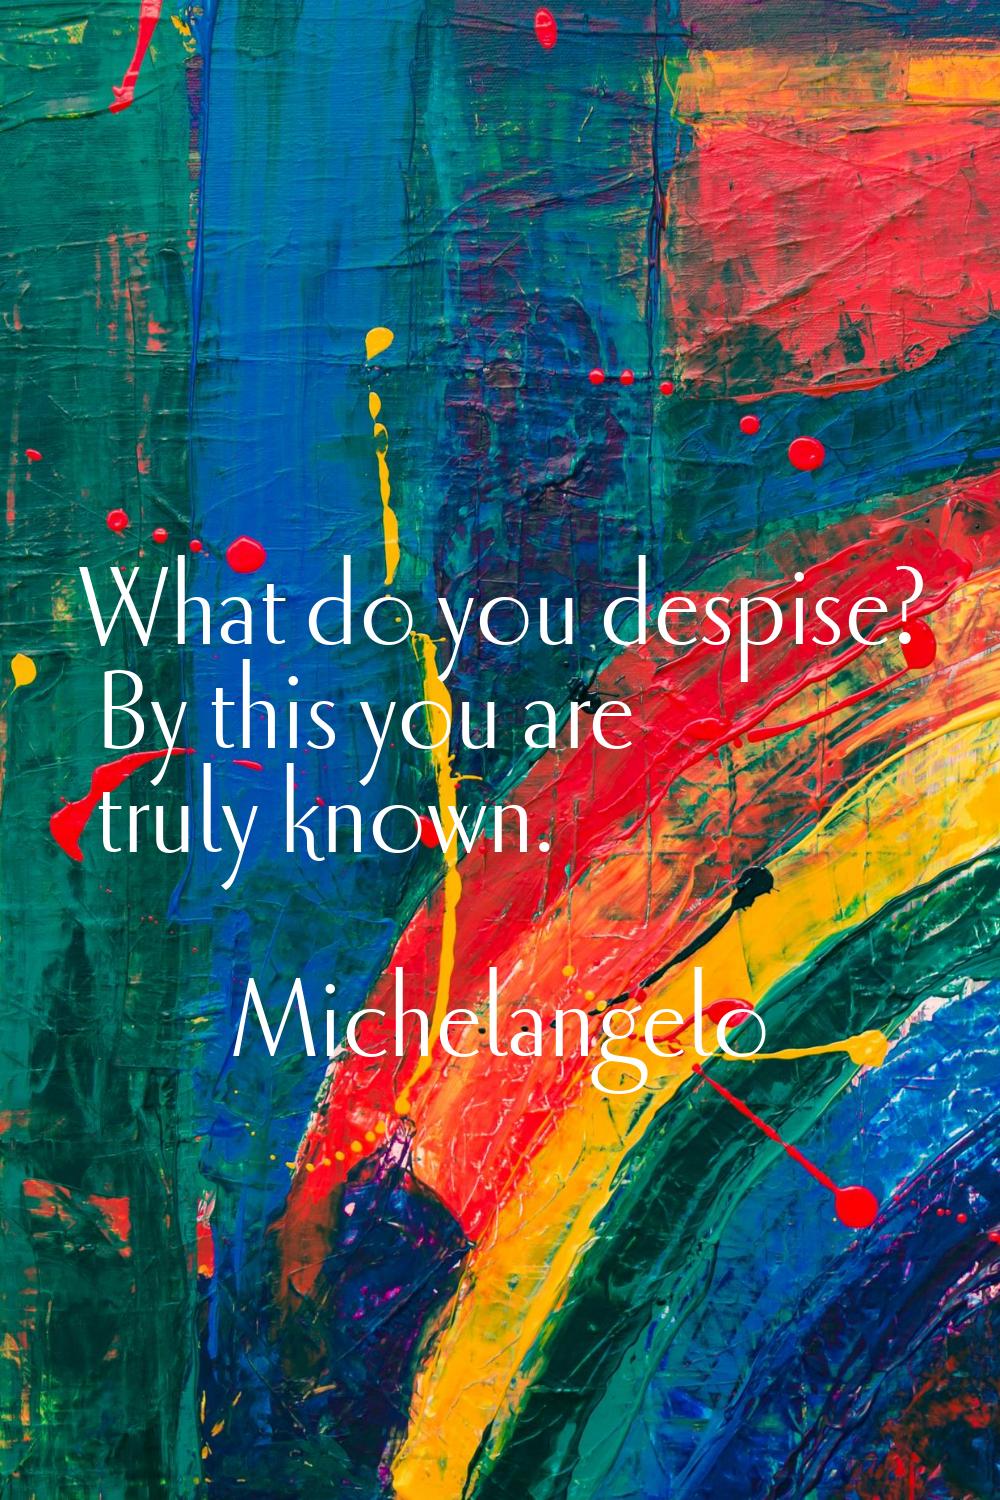 What do you despise? By this you are truly known.